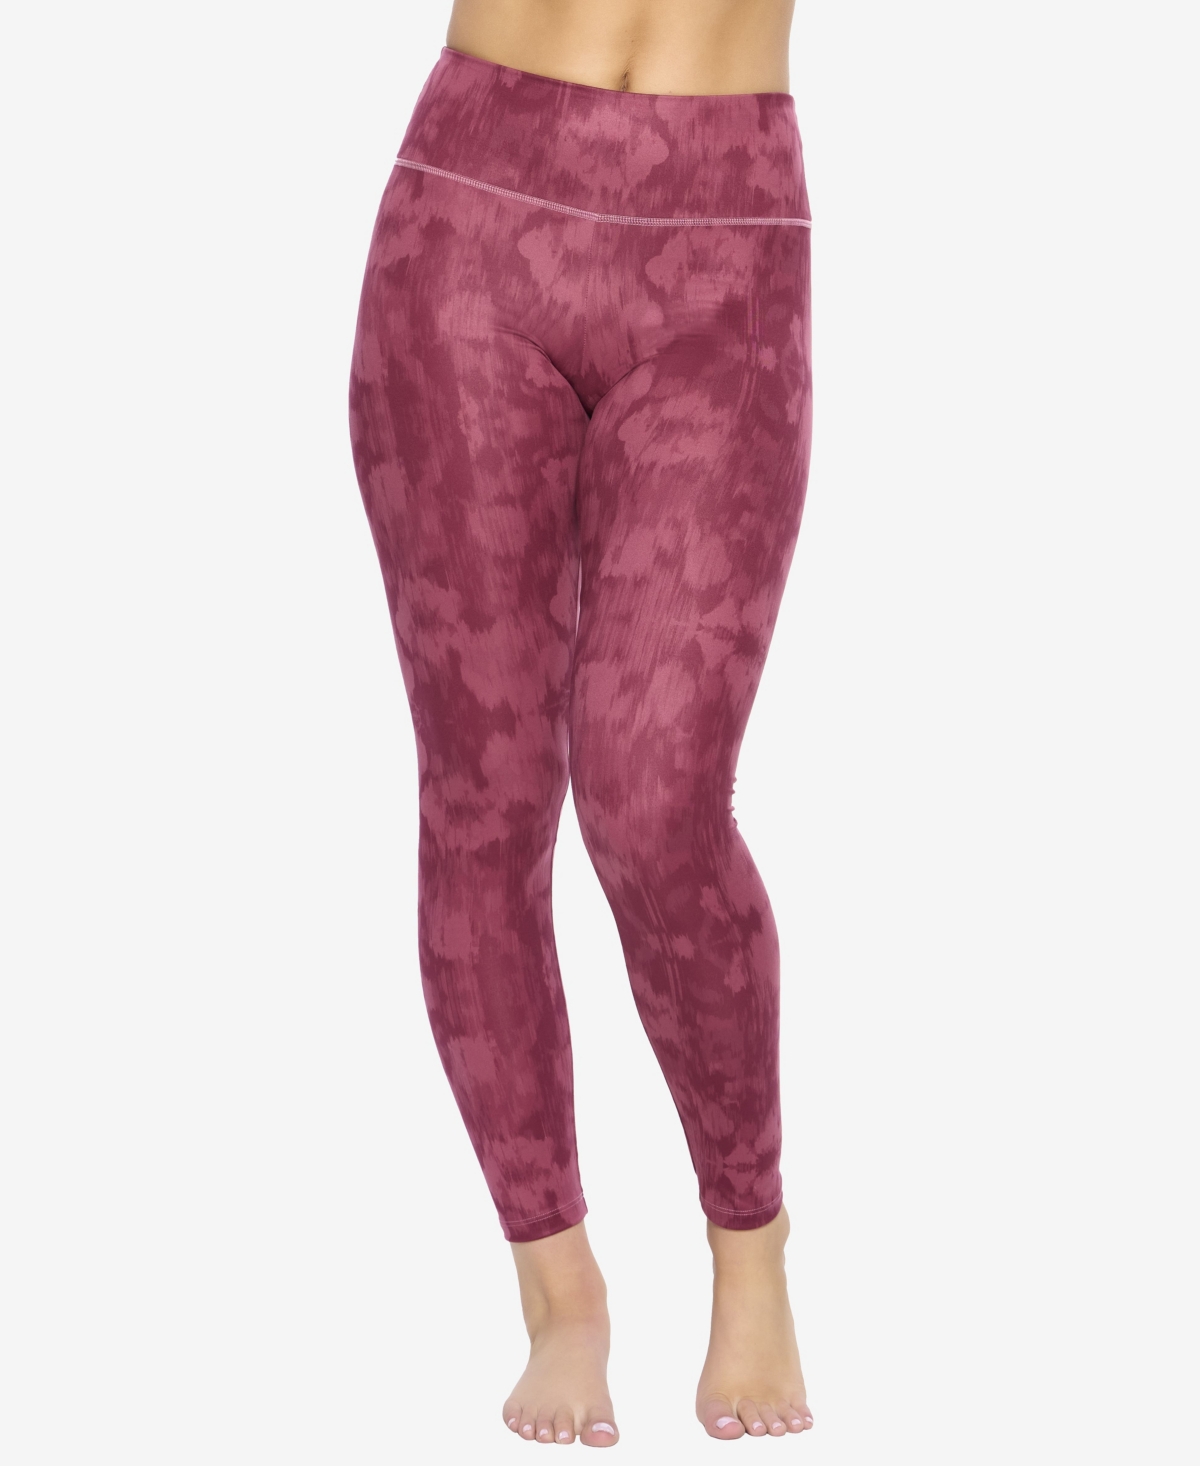 Shop Felina Women's Soft Sueded Mid-rise Leggings In Maroon Faded Floral